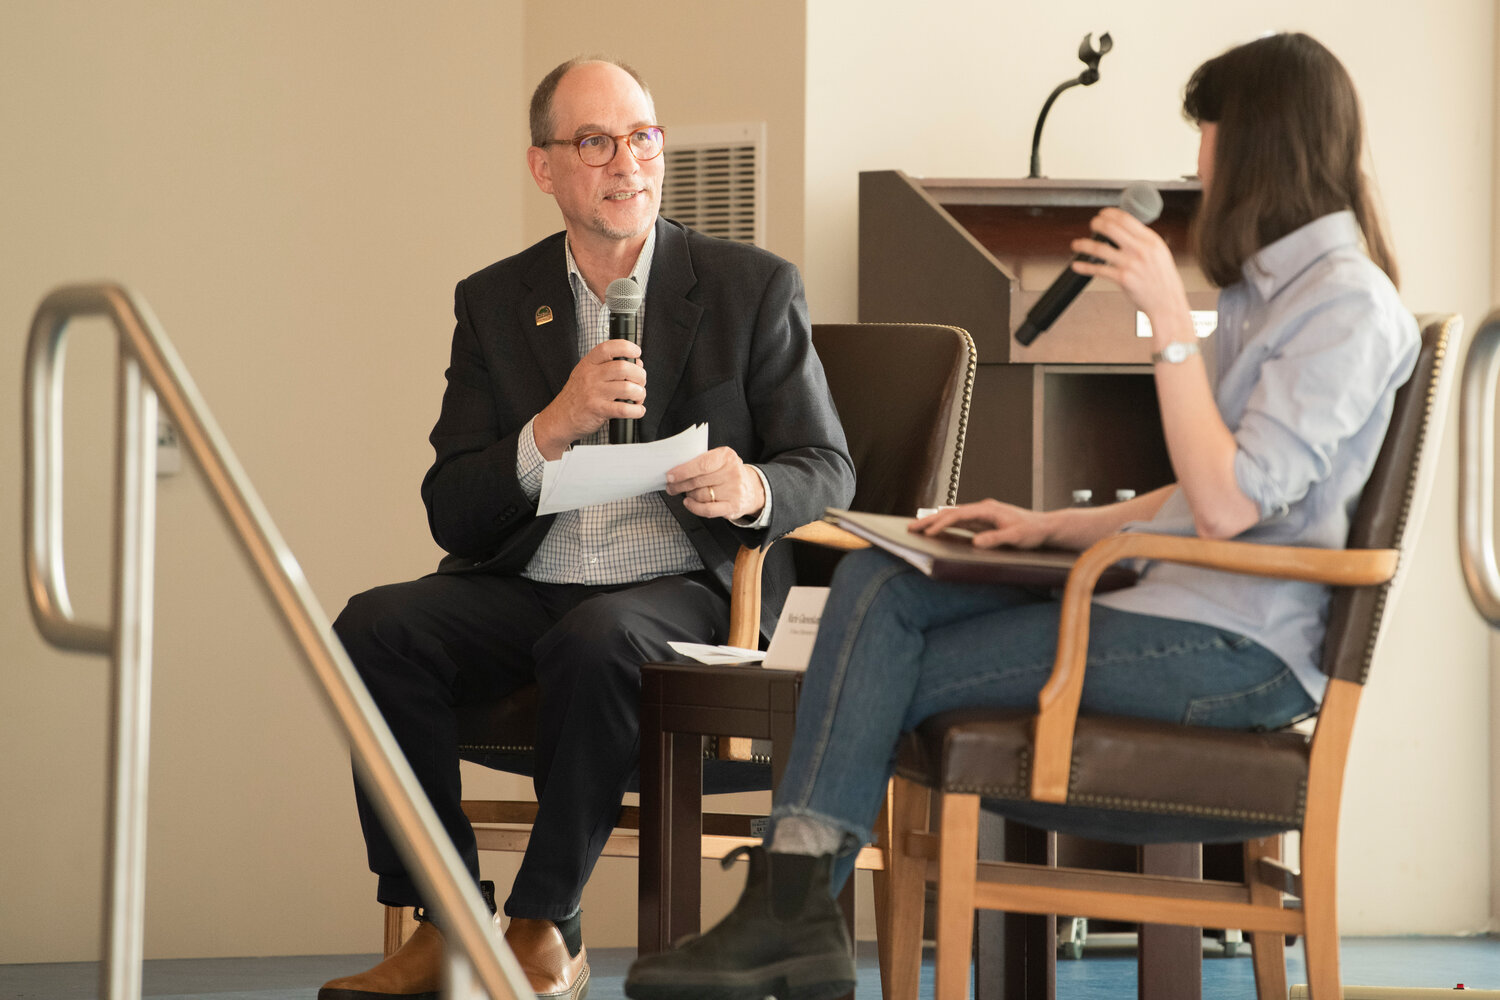 Centralia College President Bob Mohrbacher introduces Congresswoman Marie Gluesenkamp Perez during a town hall at the TransAlta Commons in Centralia on Wednesday, May 3.